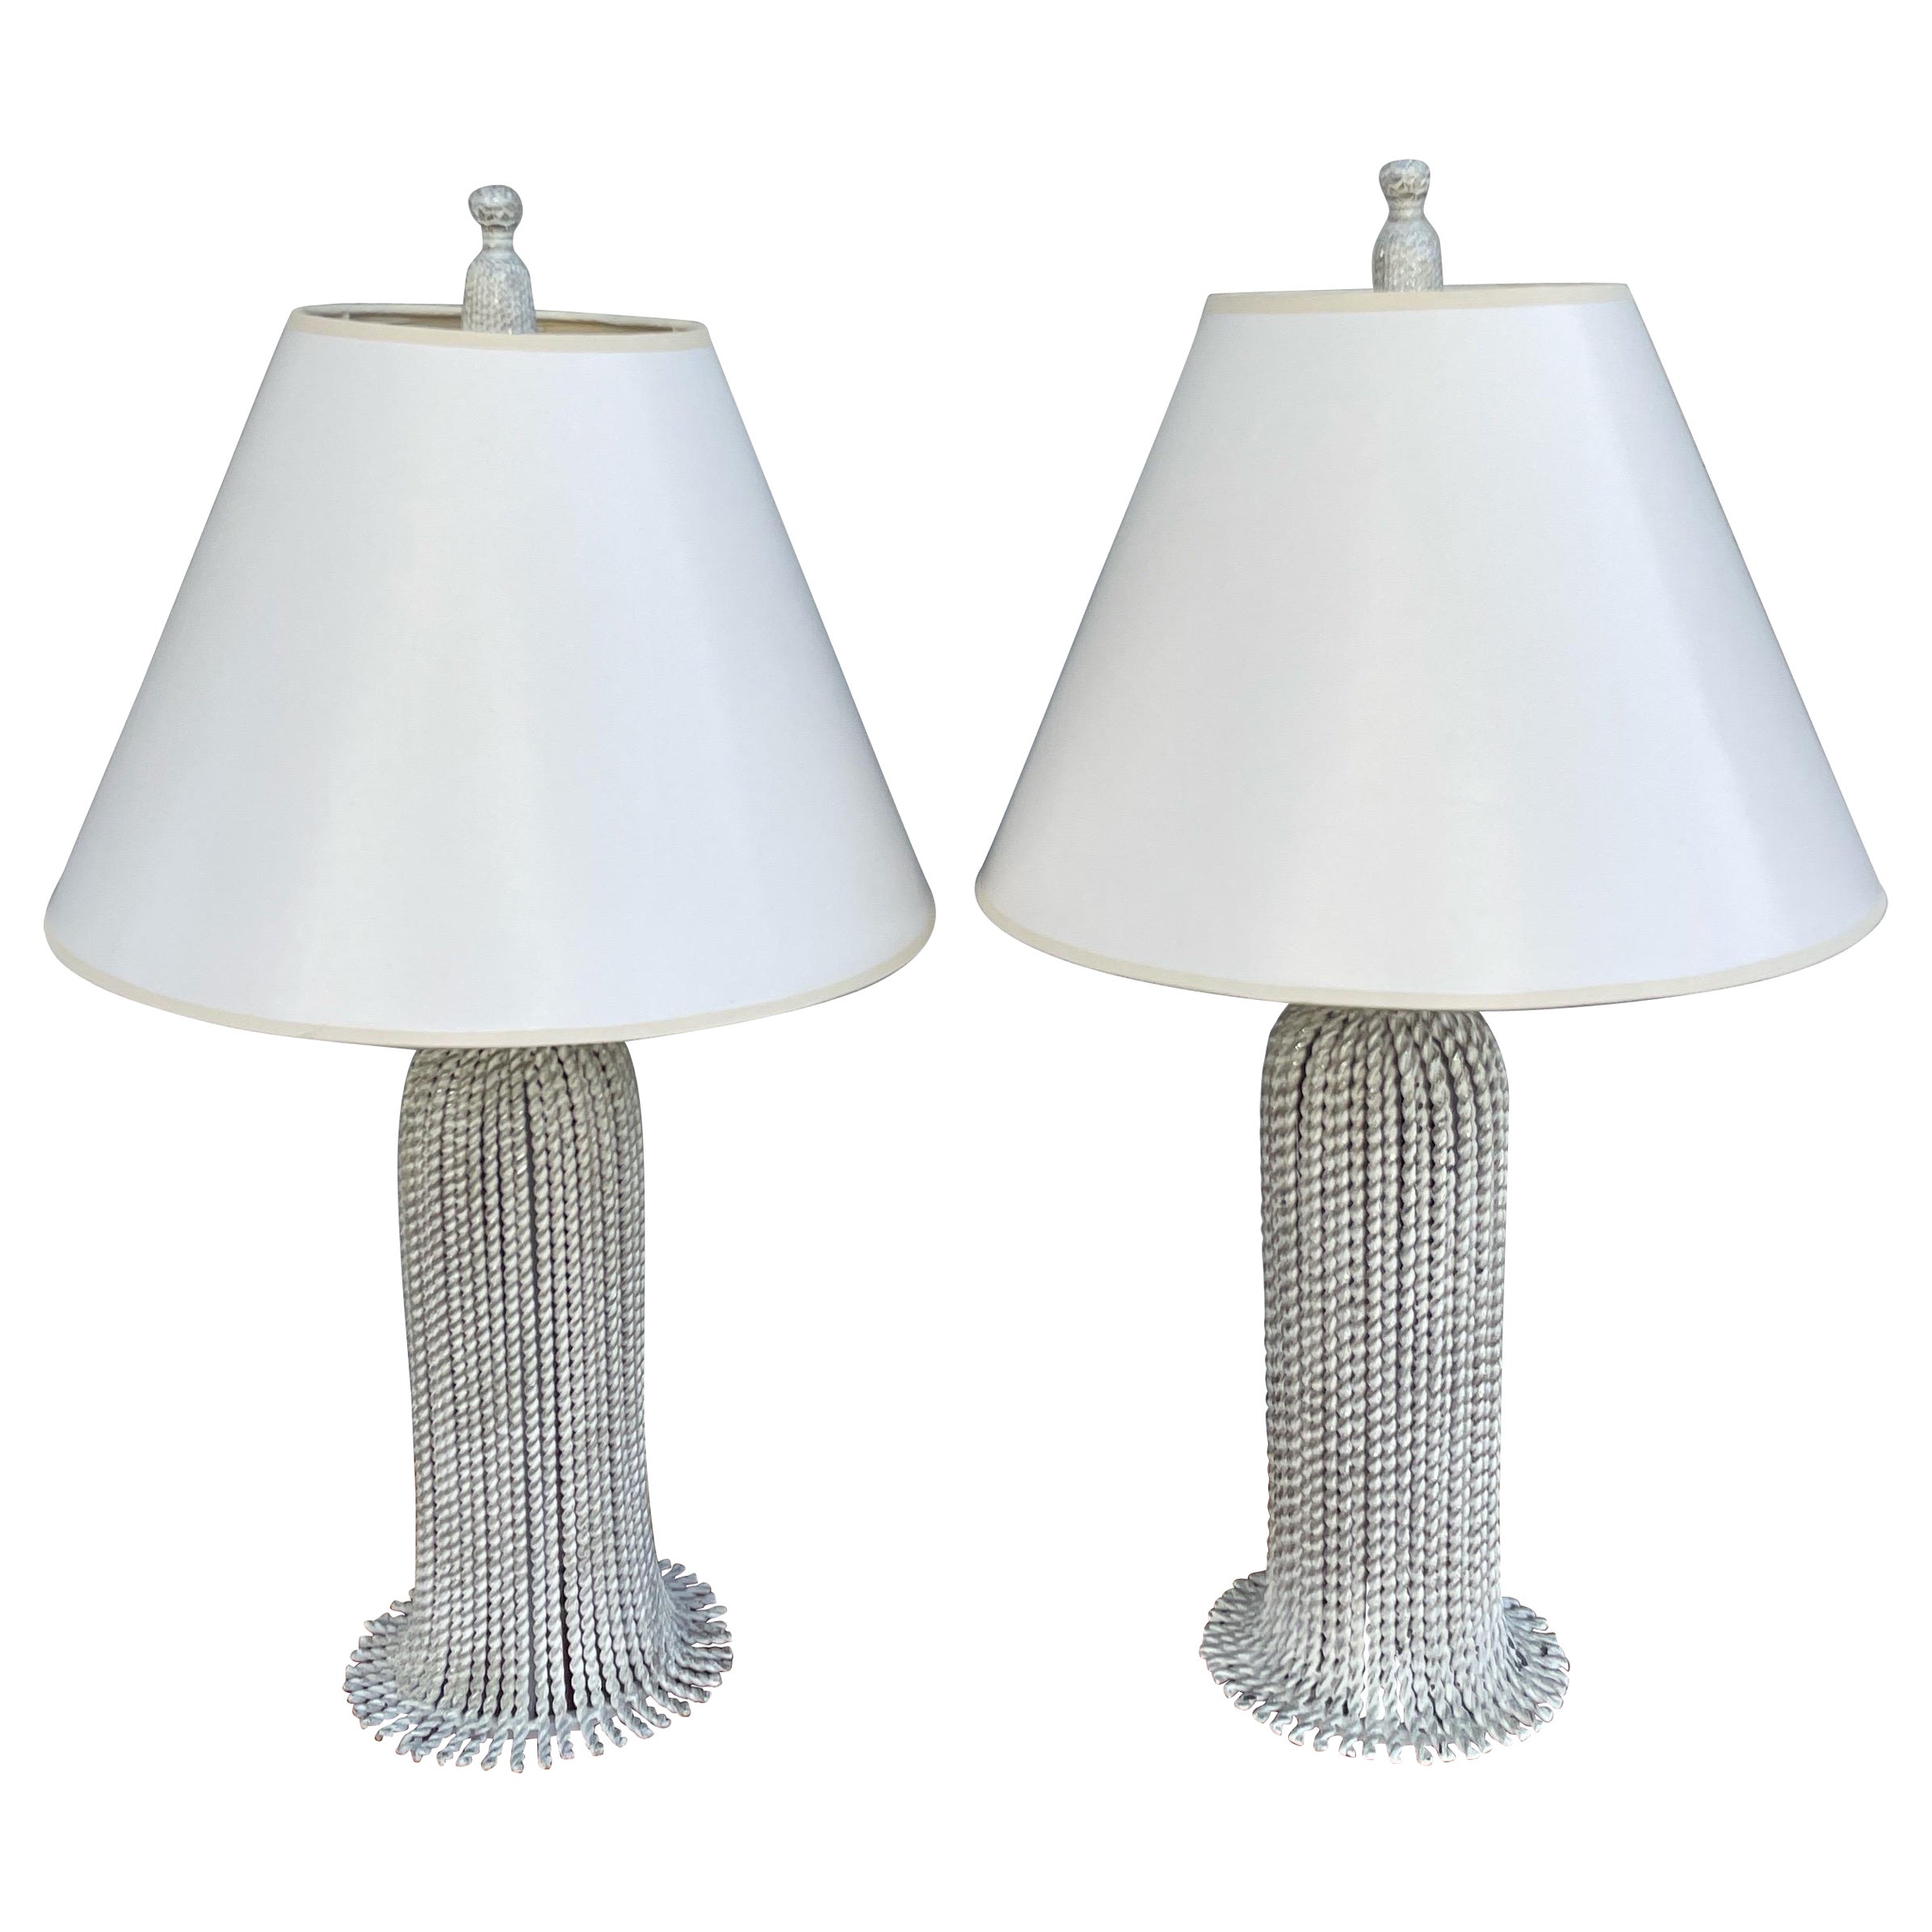 Pair of Hollywood Regency Style Twisted Rope Lamps